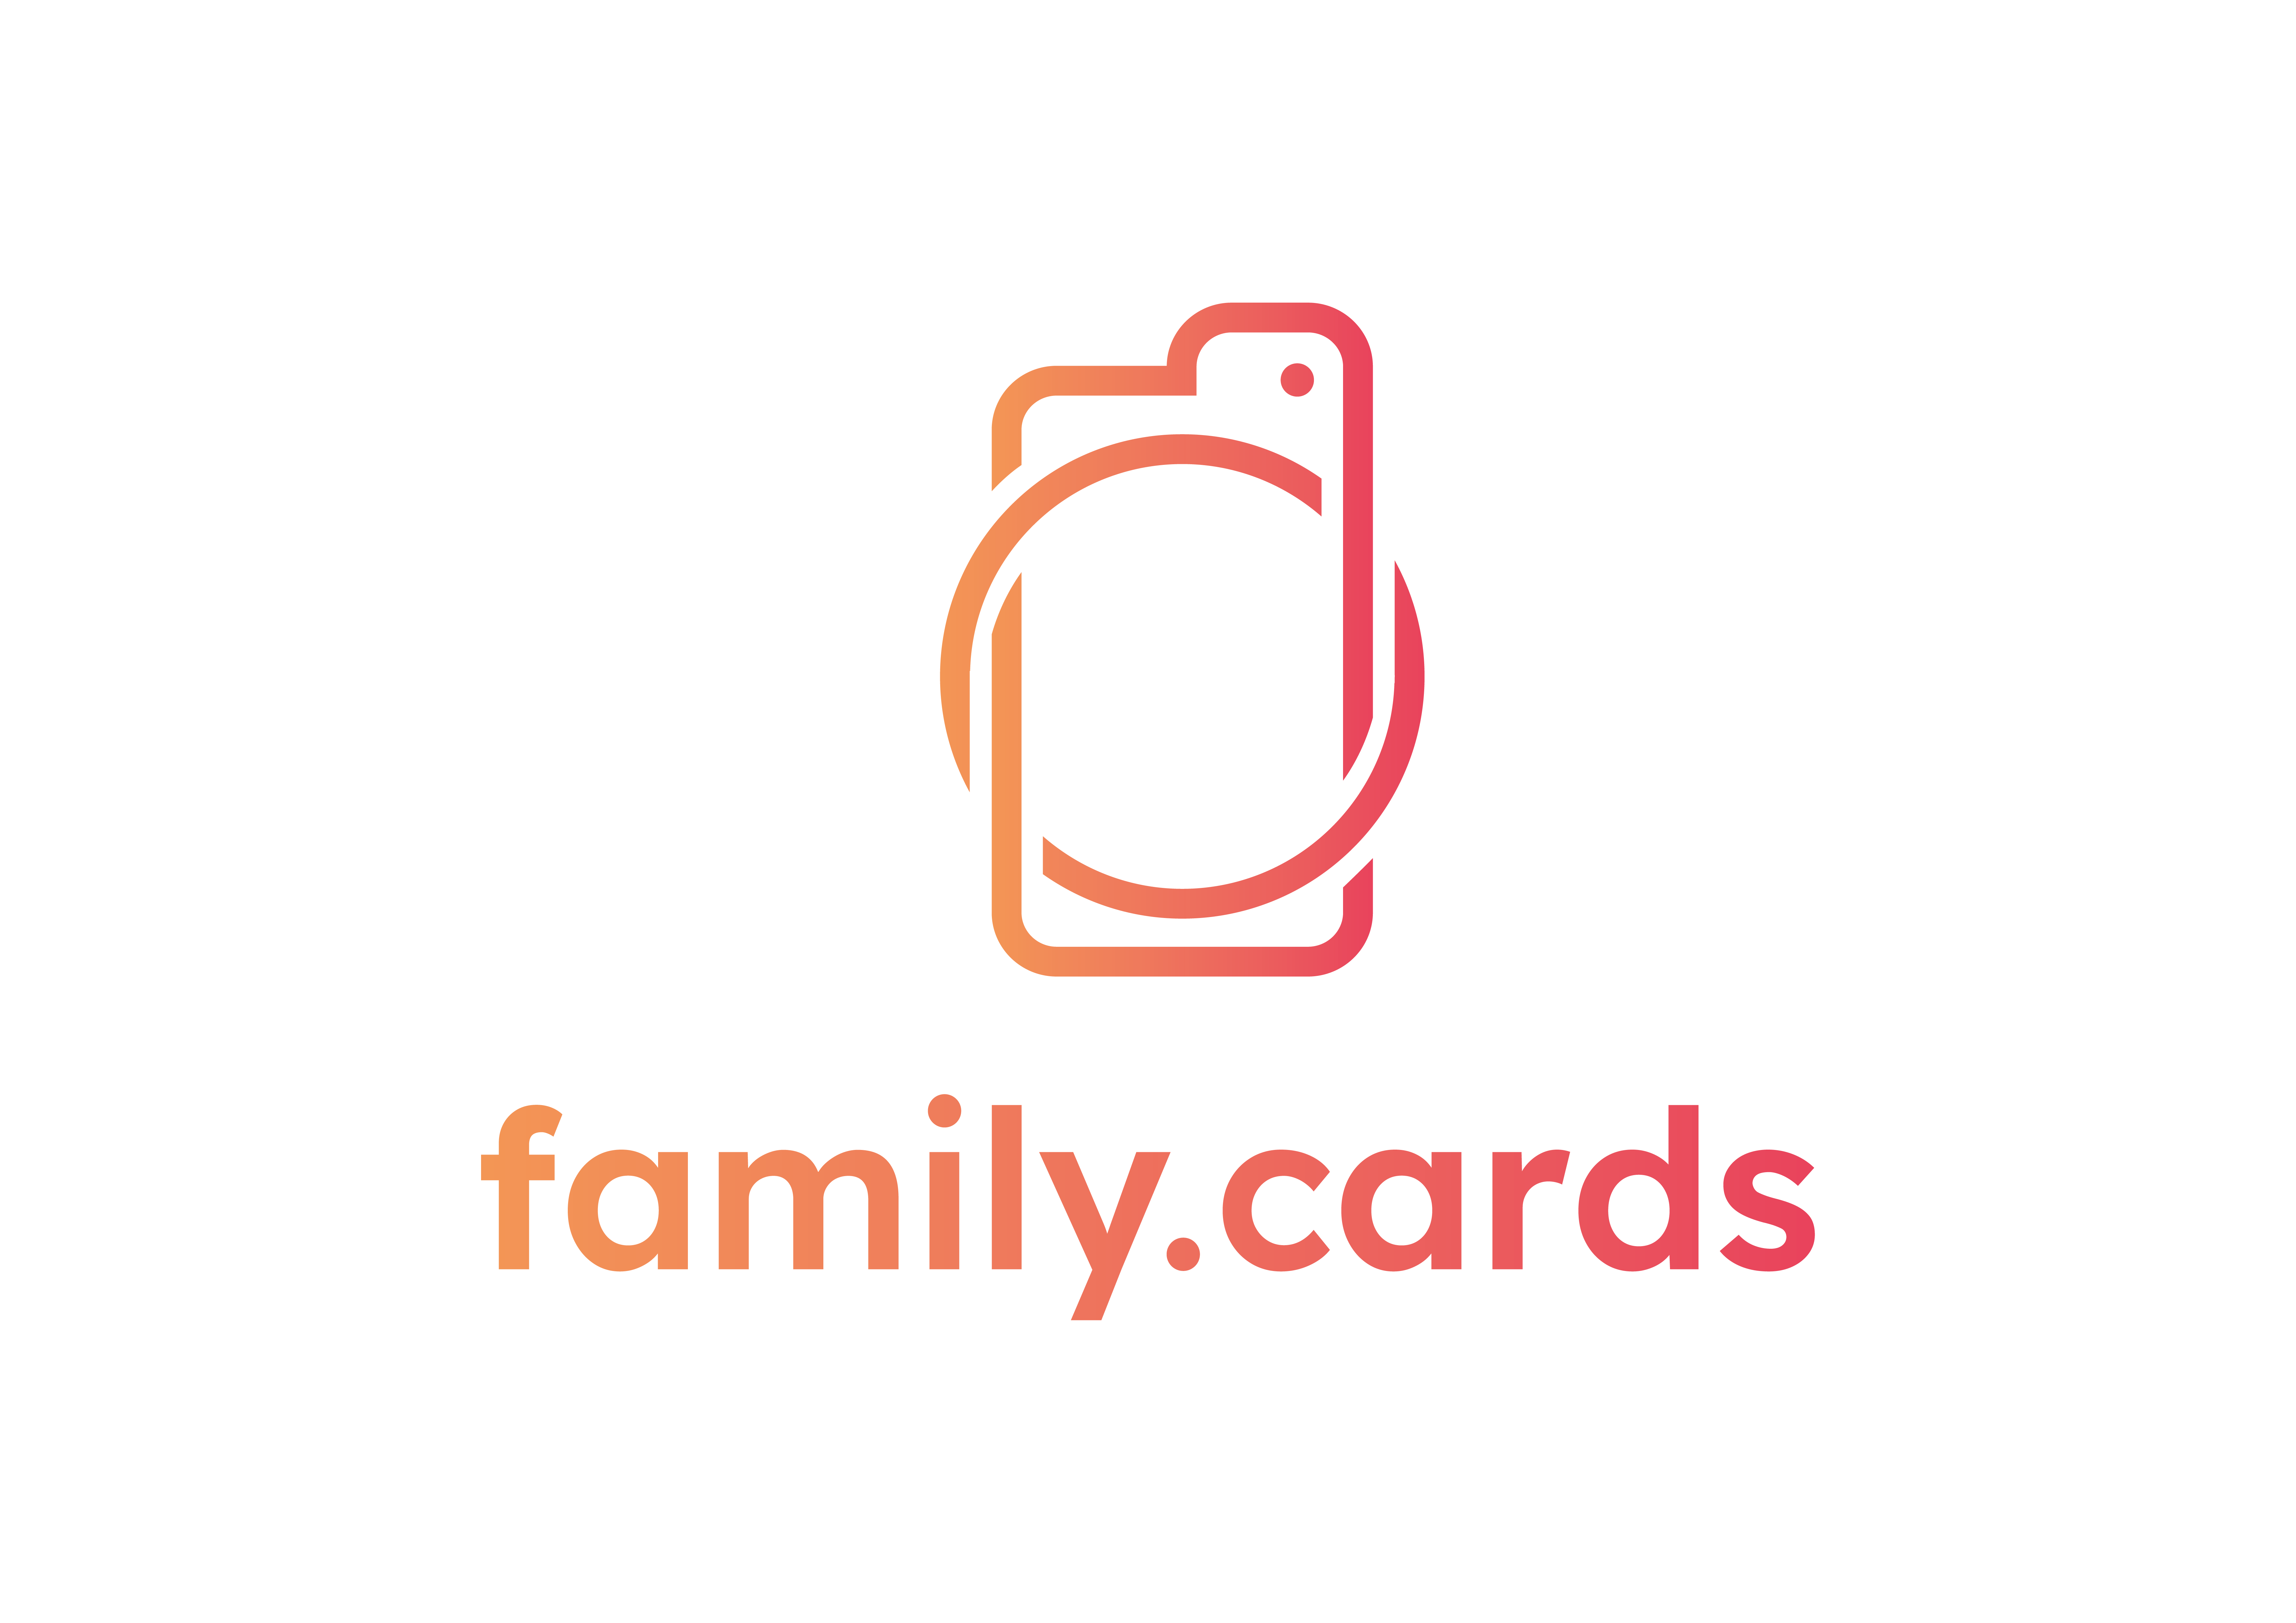 family.cards / Generation Reach GmbH